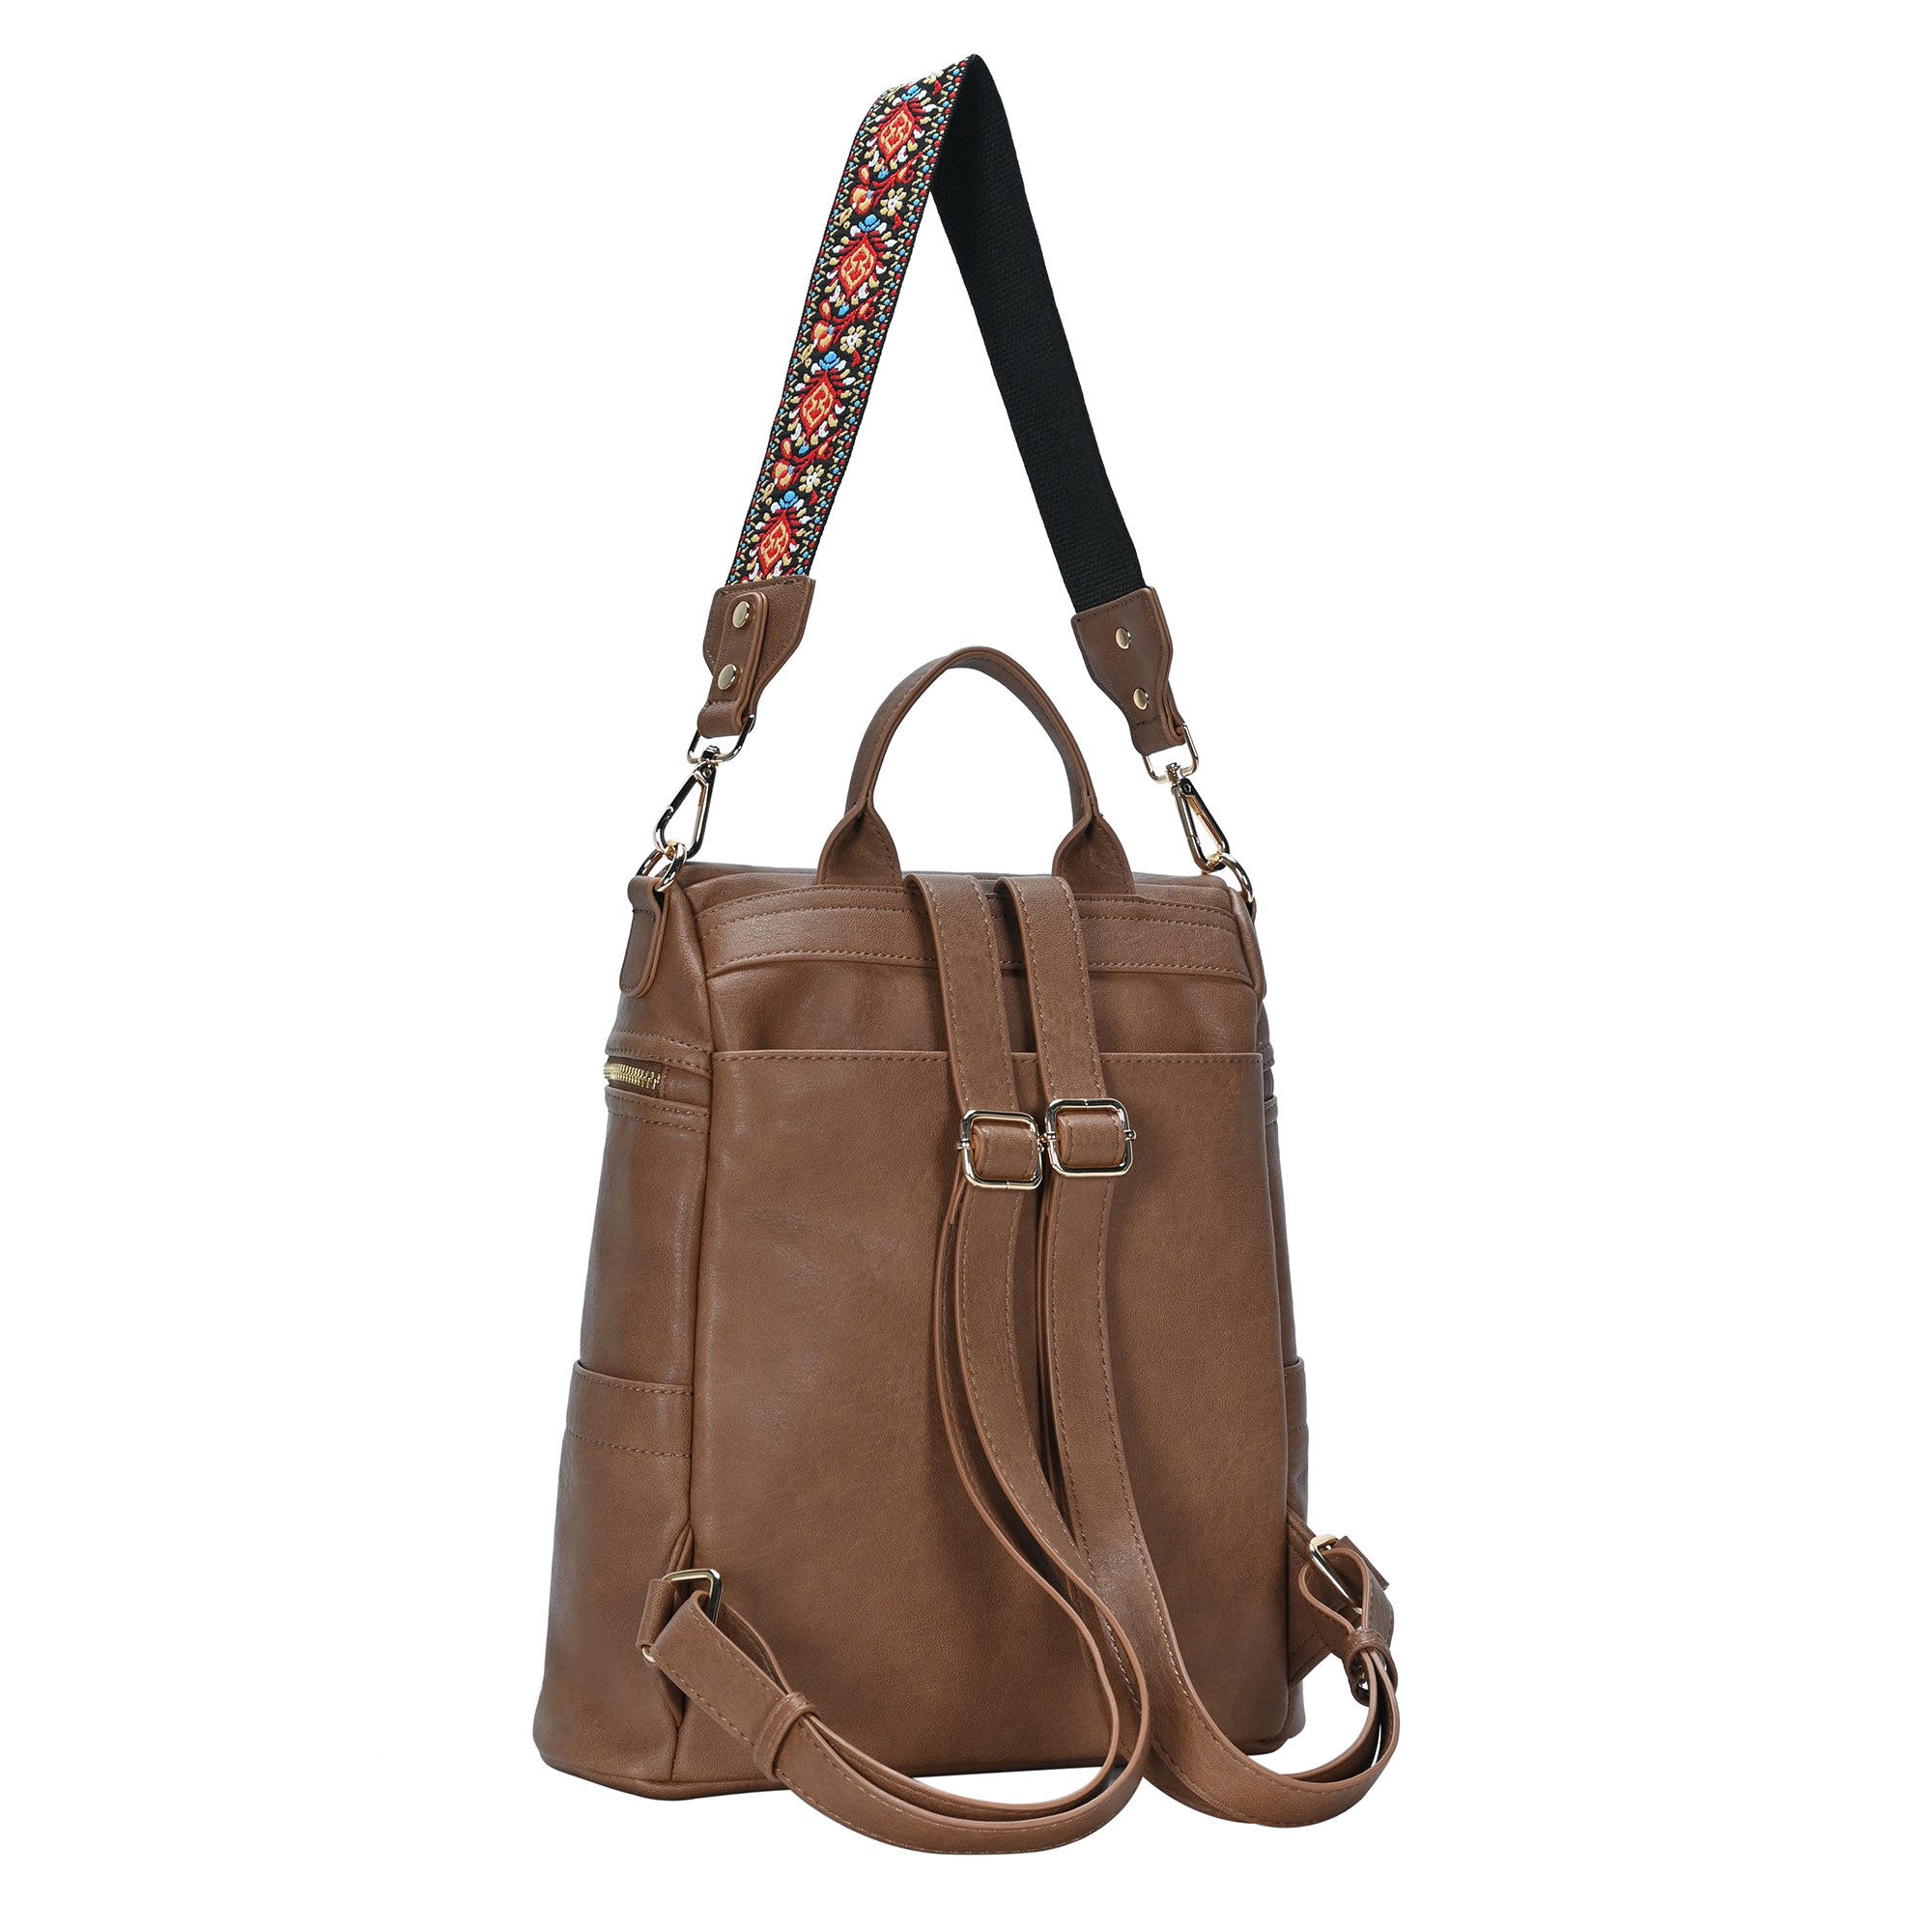 Diana Convertible Backpack Straps